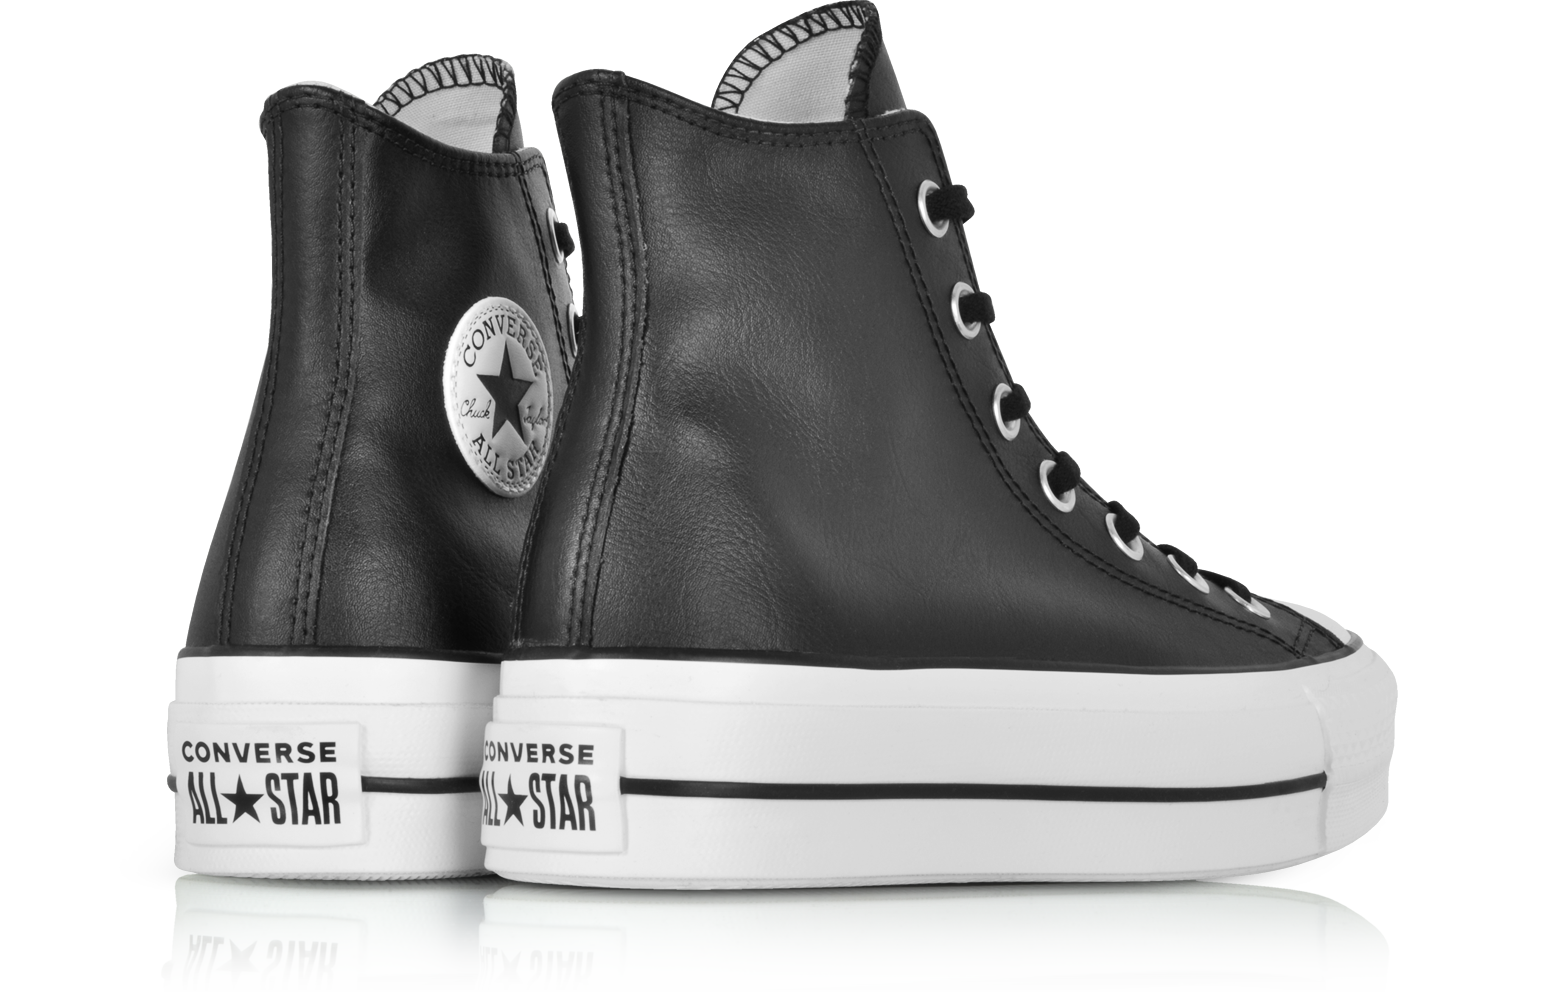 chuck taylor all star lift leather high top